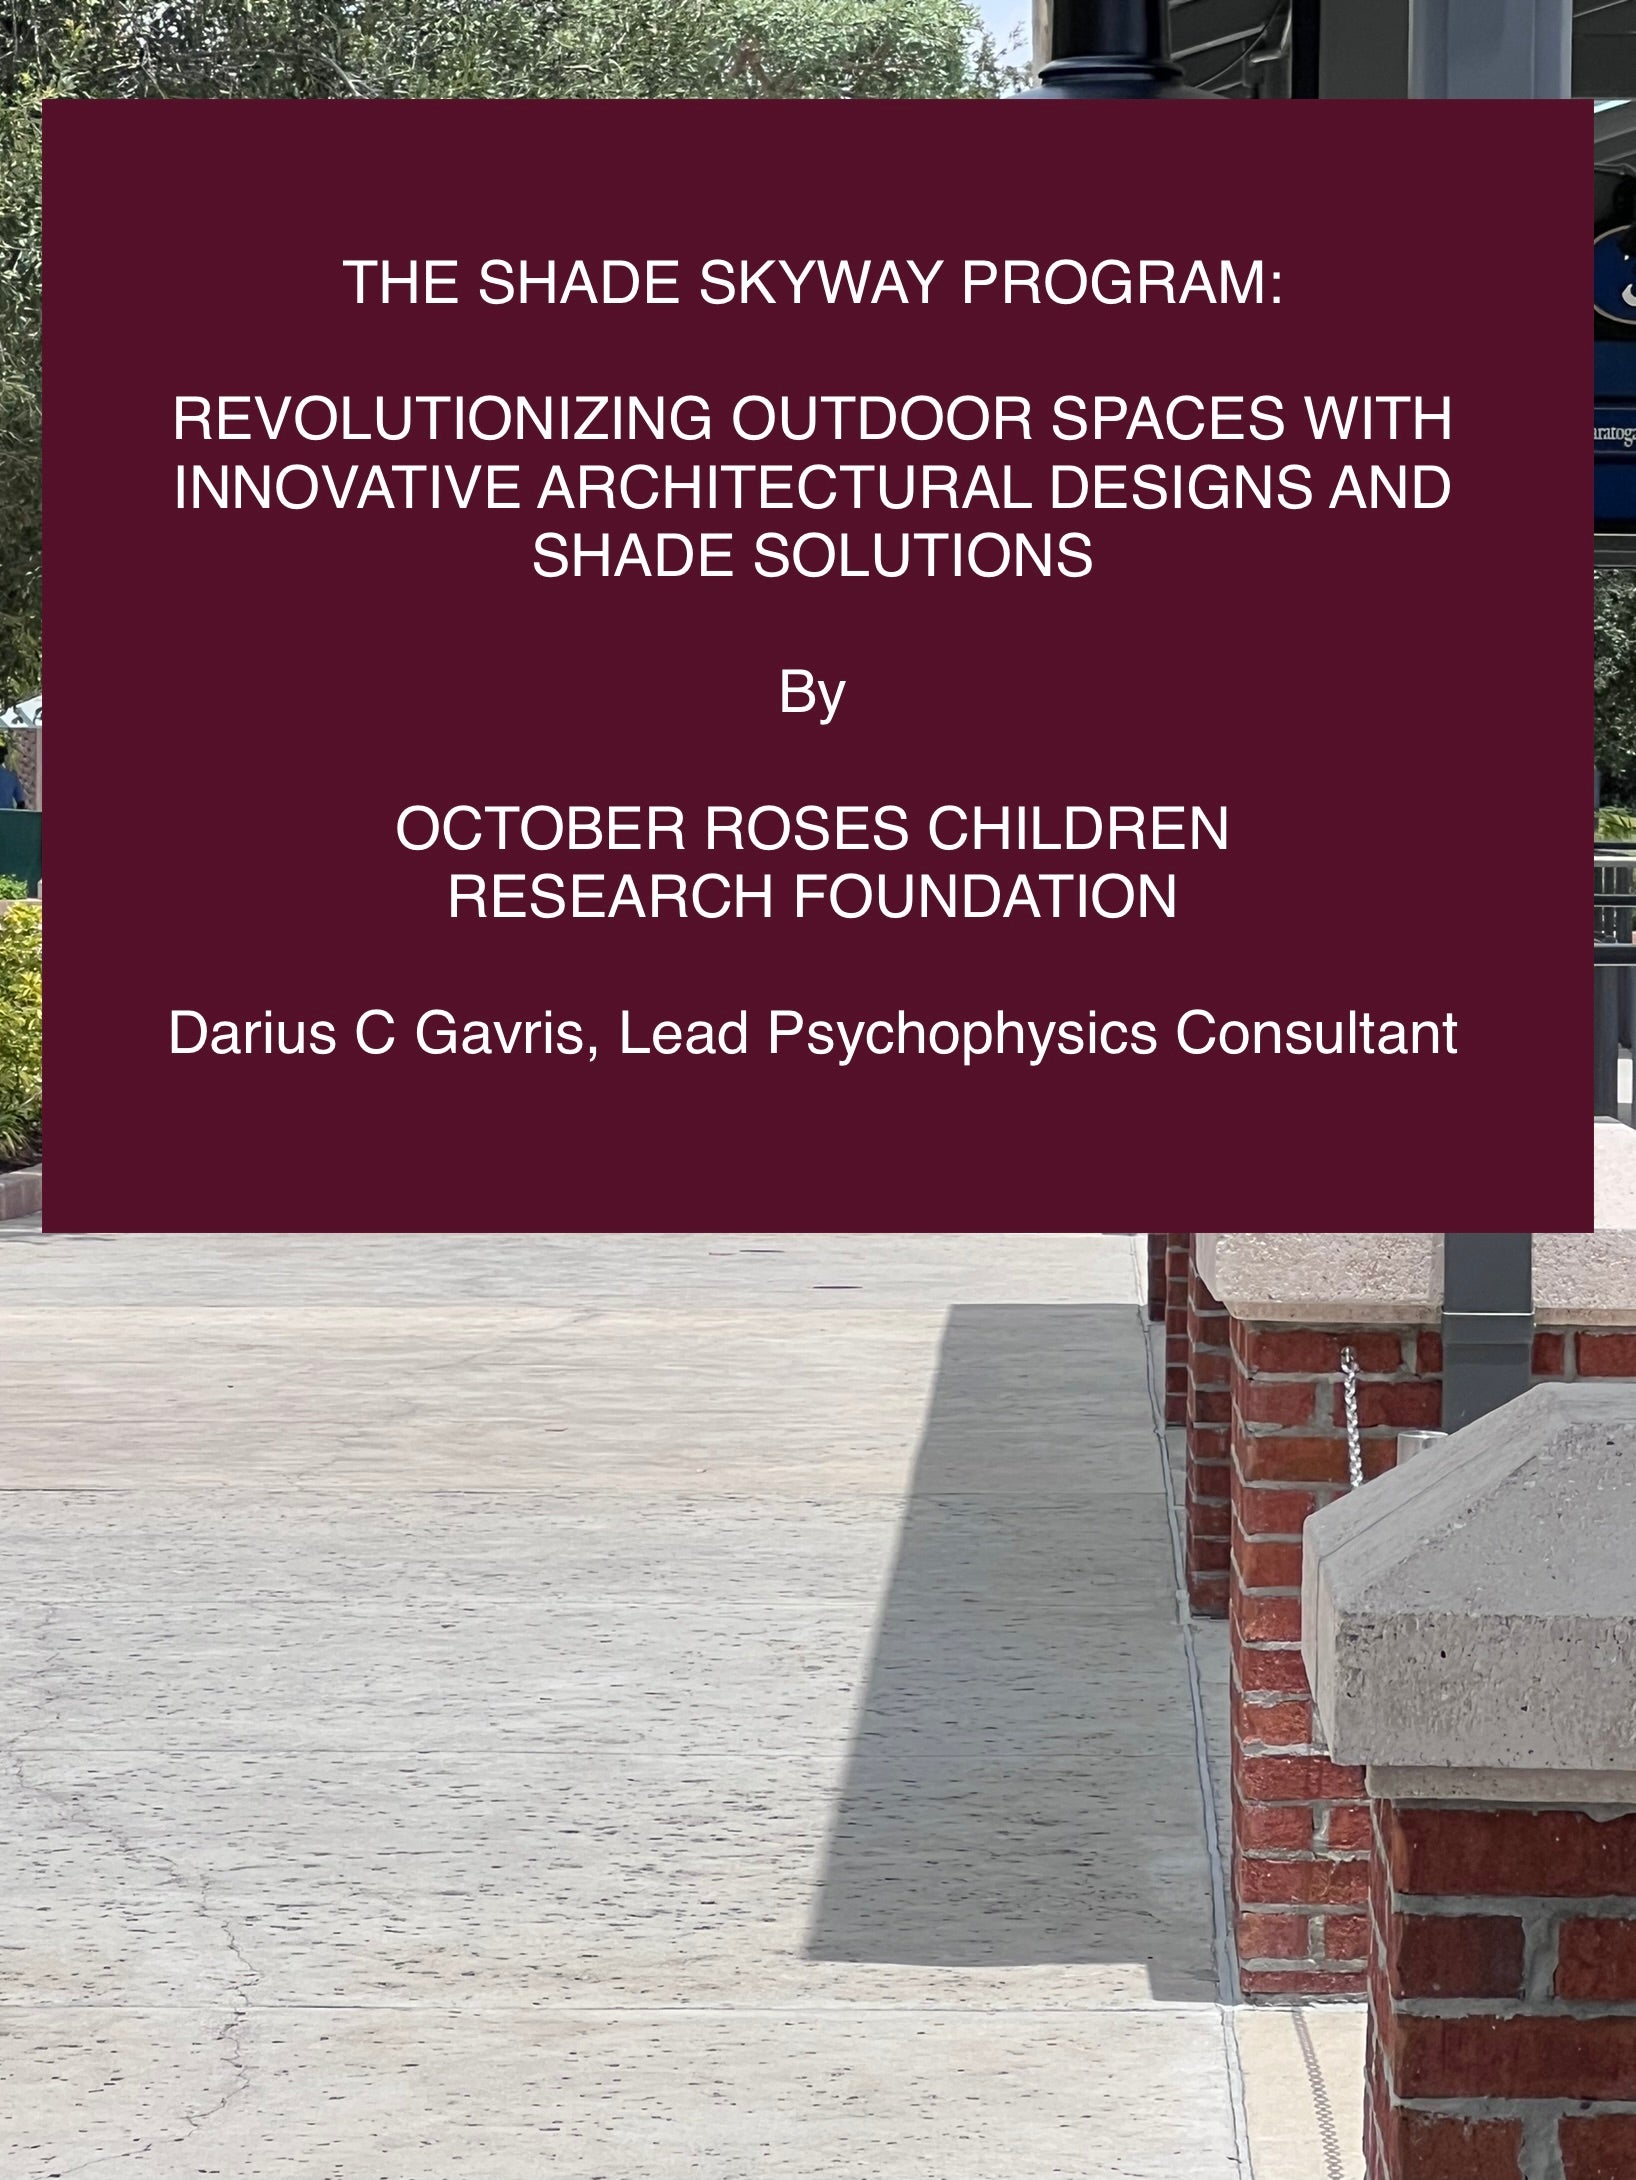 PRESS RELEASE / October Roses Children Research Foundation Introduces the Shade Skyway Program: Revolutionizing Outdoor Spaces with Innovative Architectural Designs and Shade Solutions